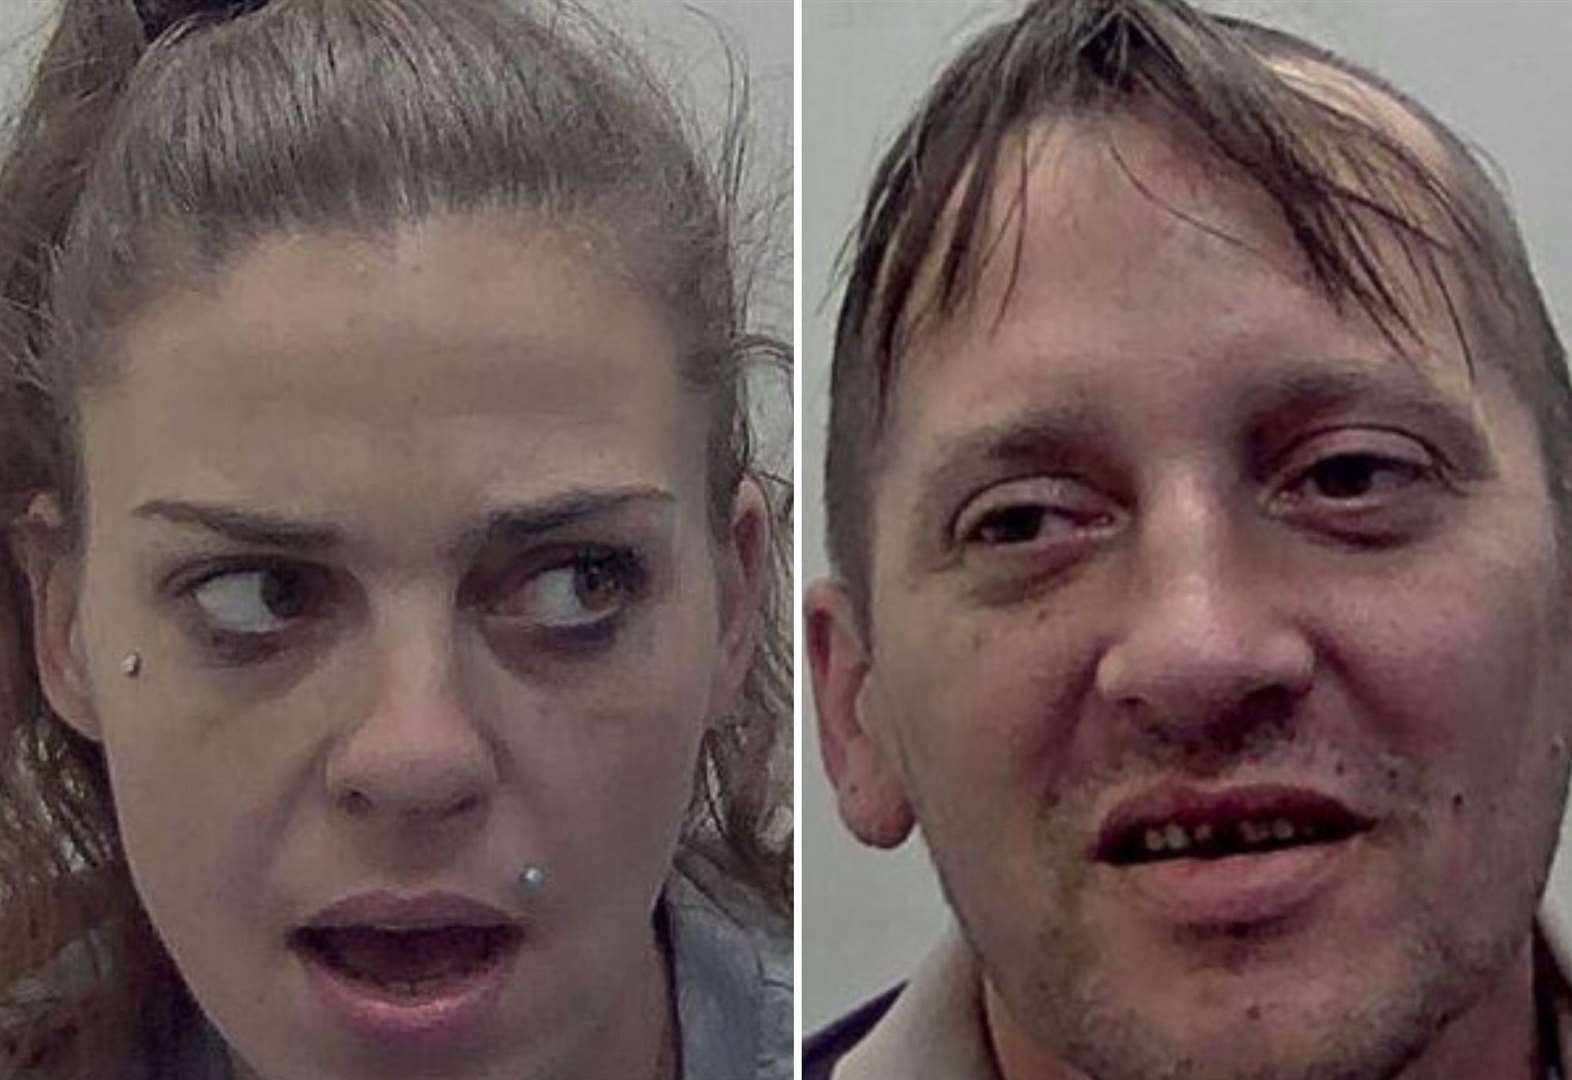 Herne Bay sex sting couple pictured after judge jails them for six years